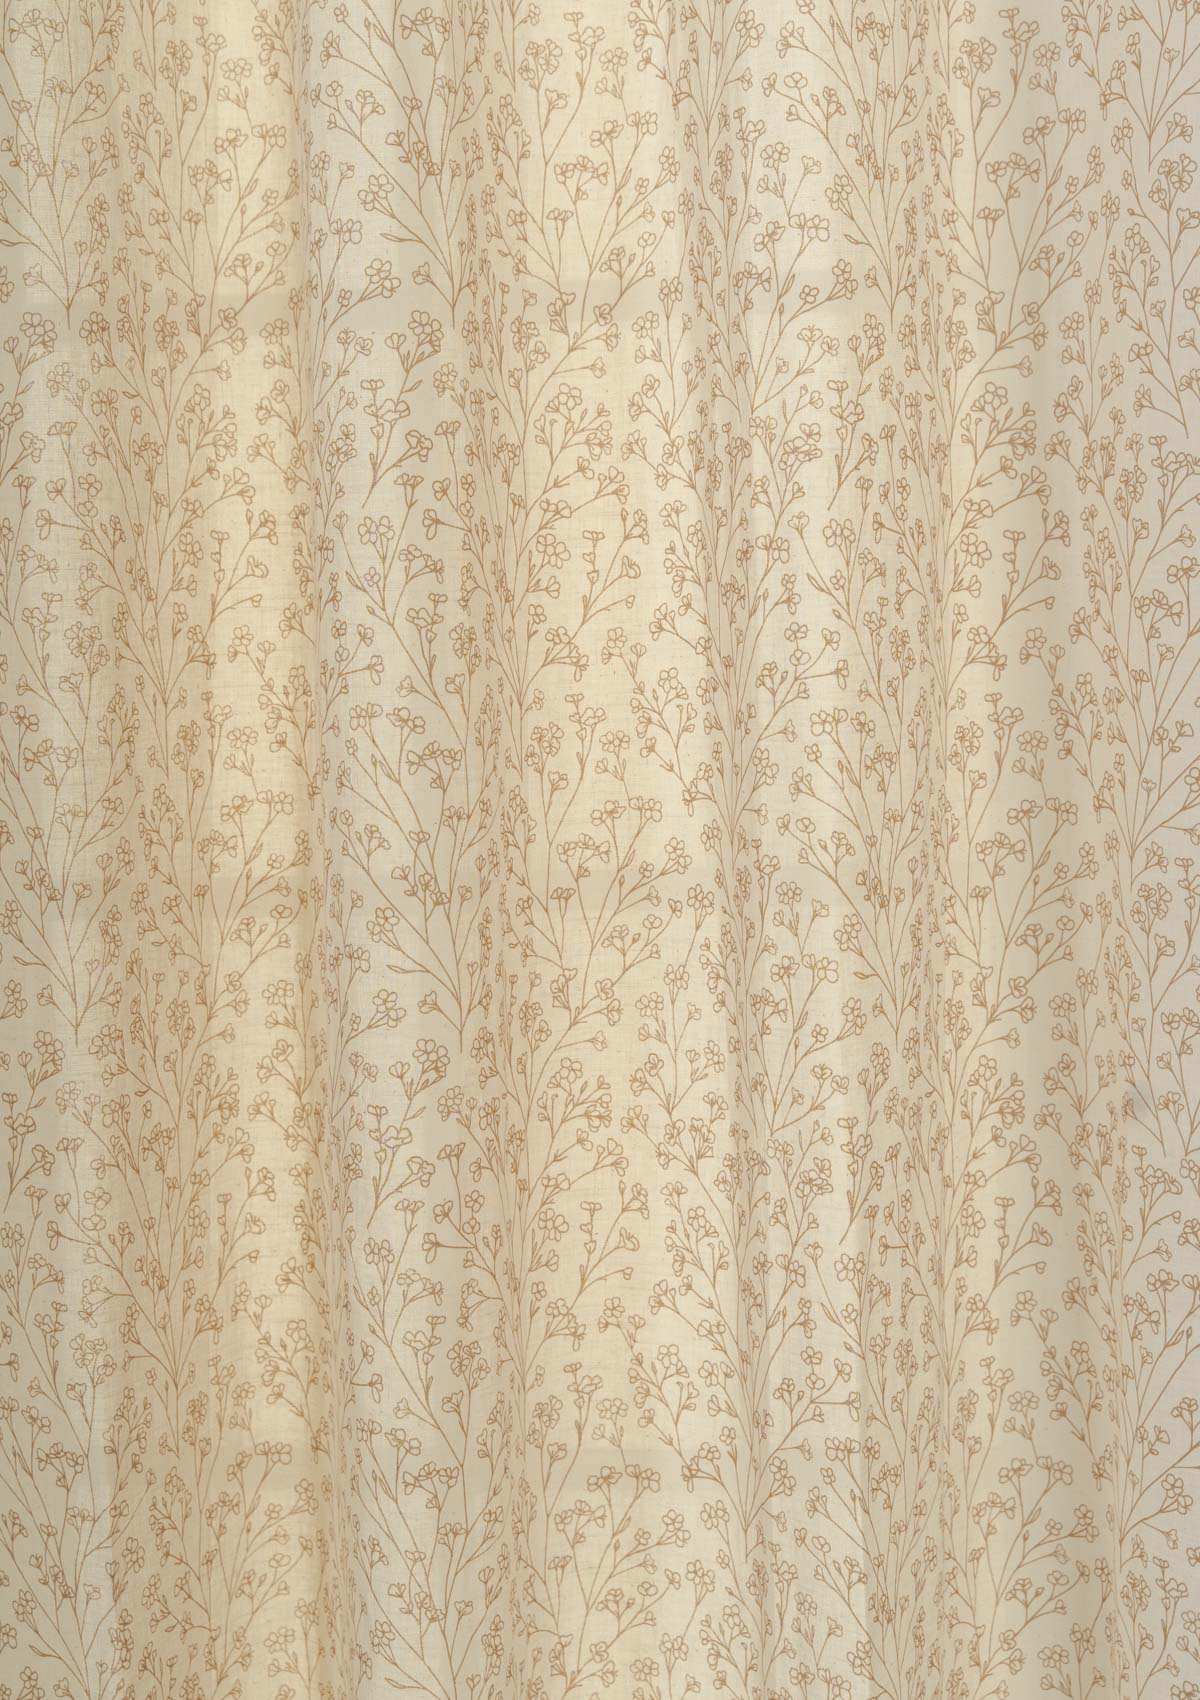 Canopy 100% cotton floral sheer fabric for living room - Light filtering - Brown